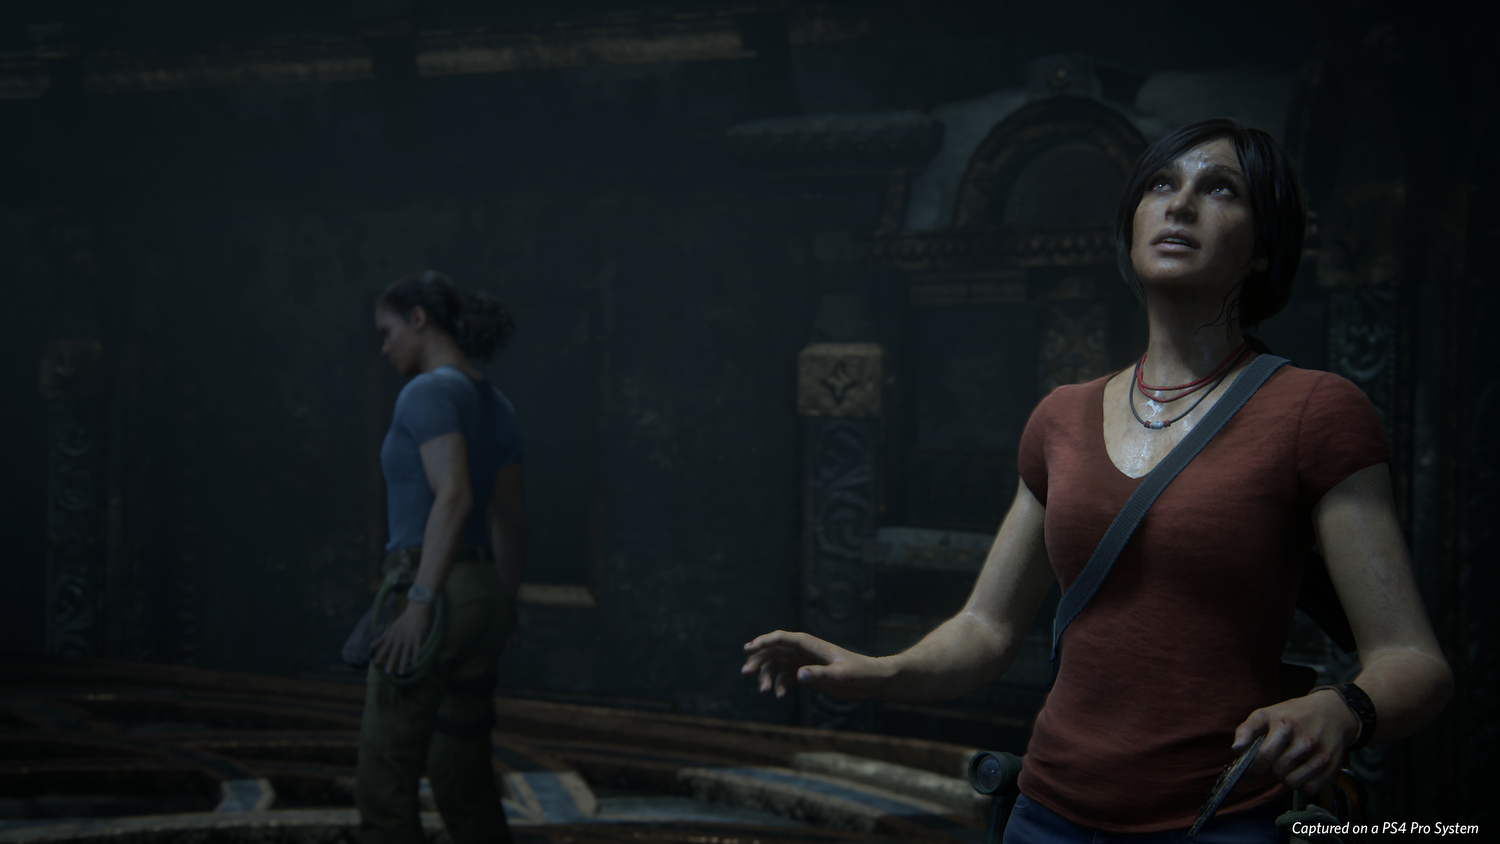 Uncharted: The Lost Legacy - PC Game Profile